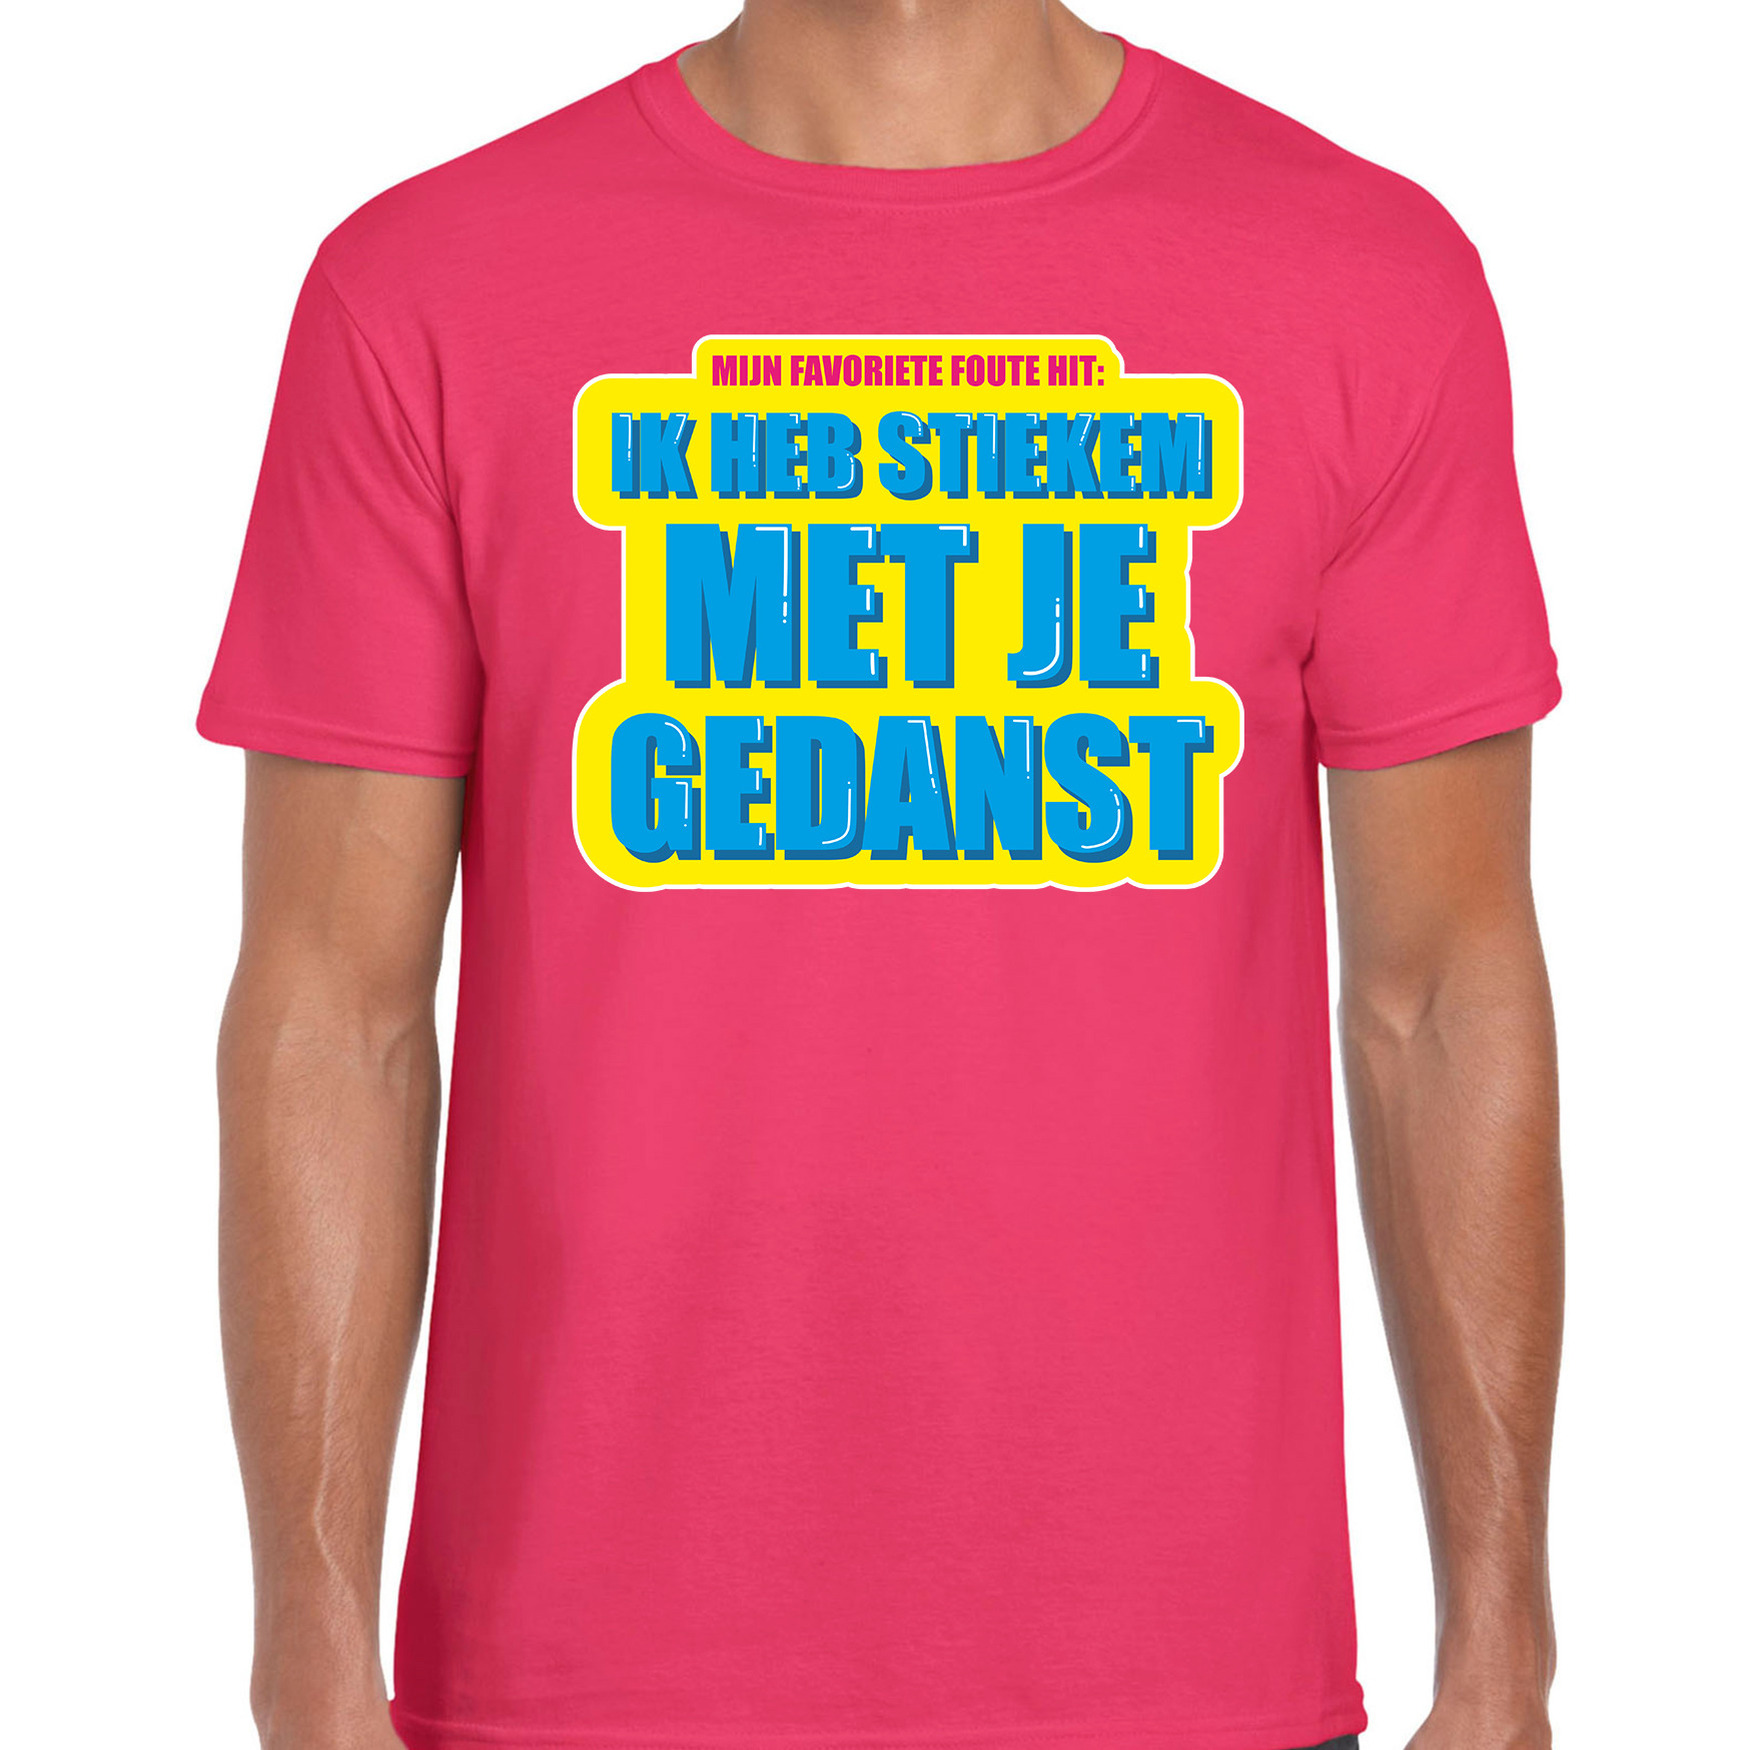 Foute party Stiekem met je gedanst verkleed t-shirt roze heren Foute party hits outfit- kleding